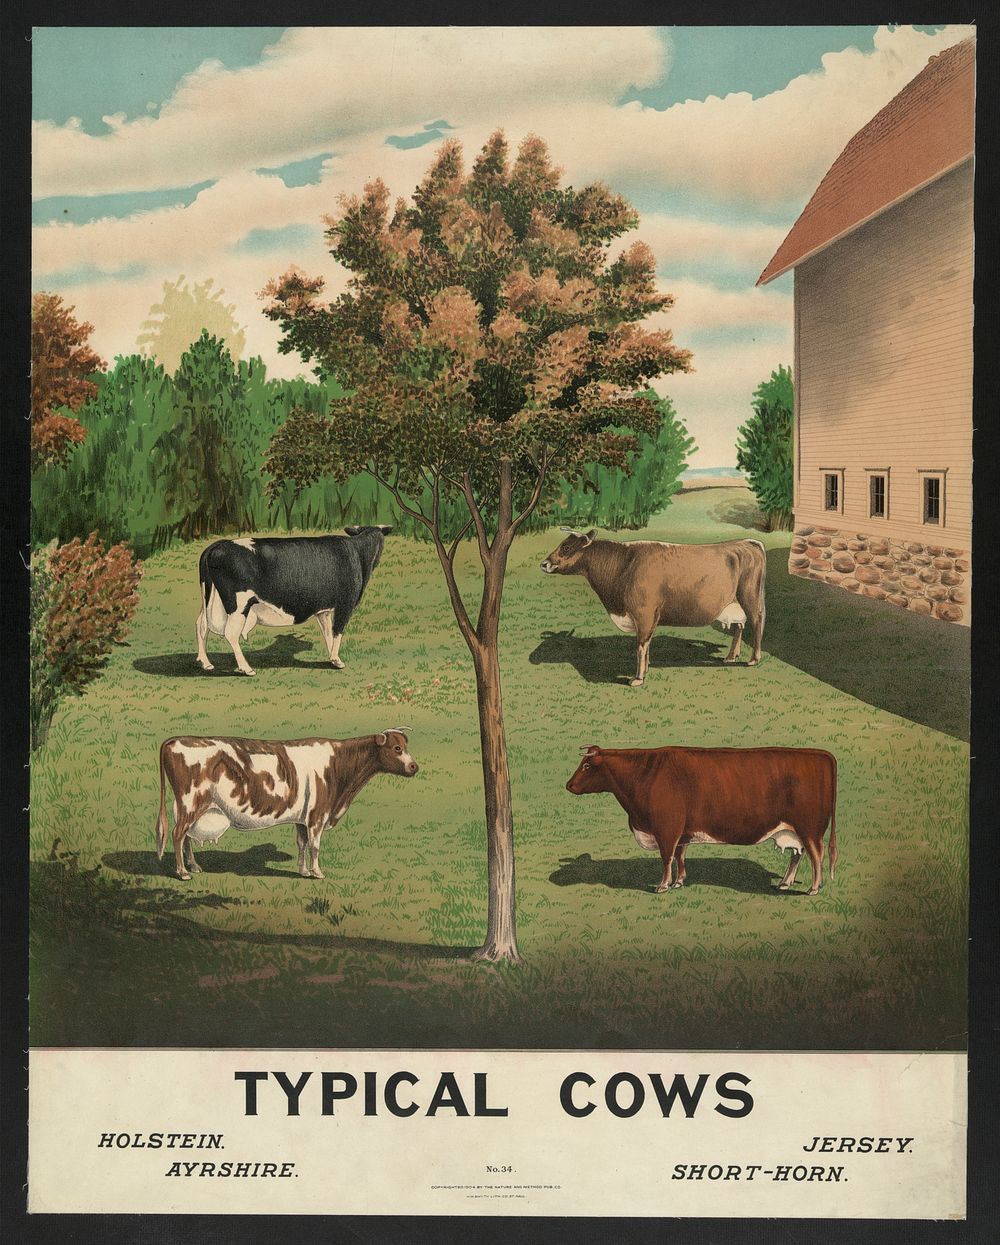 Typical cows, c1904.